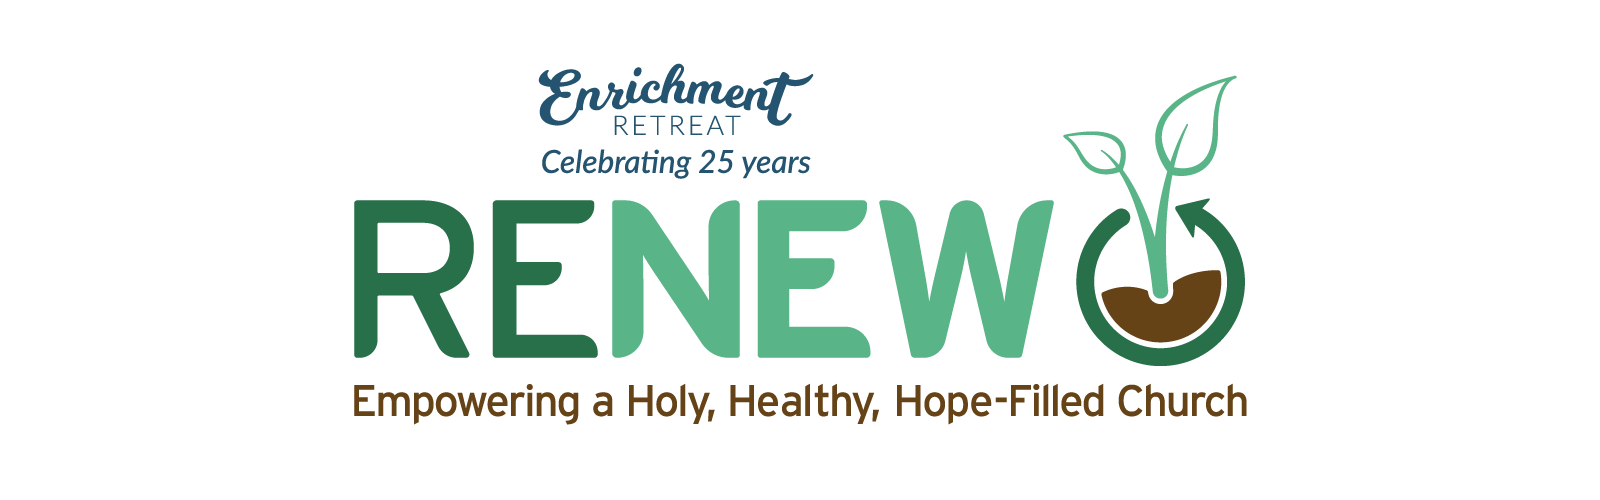 Renew: Empowering a Holy, Healthy, Hope-filled Church